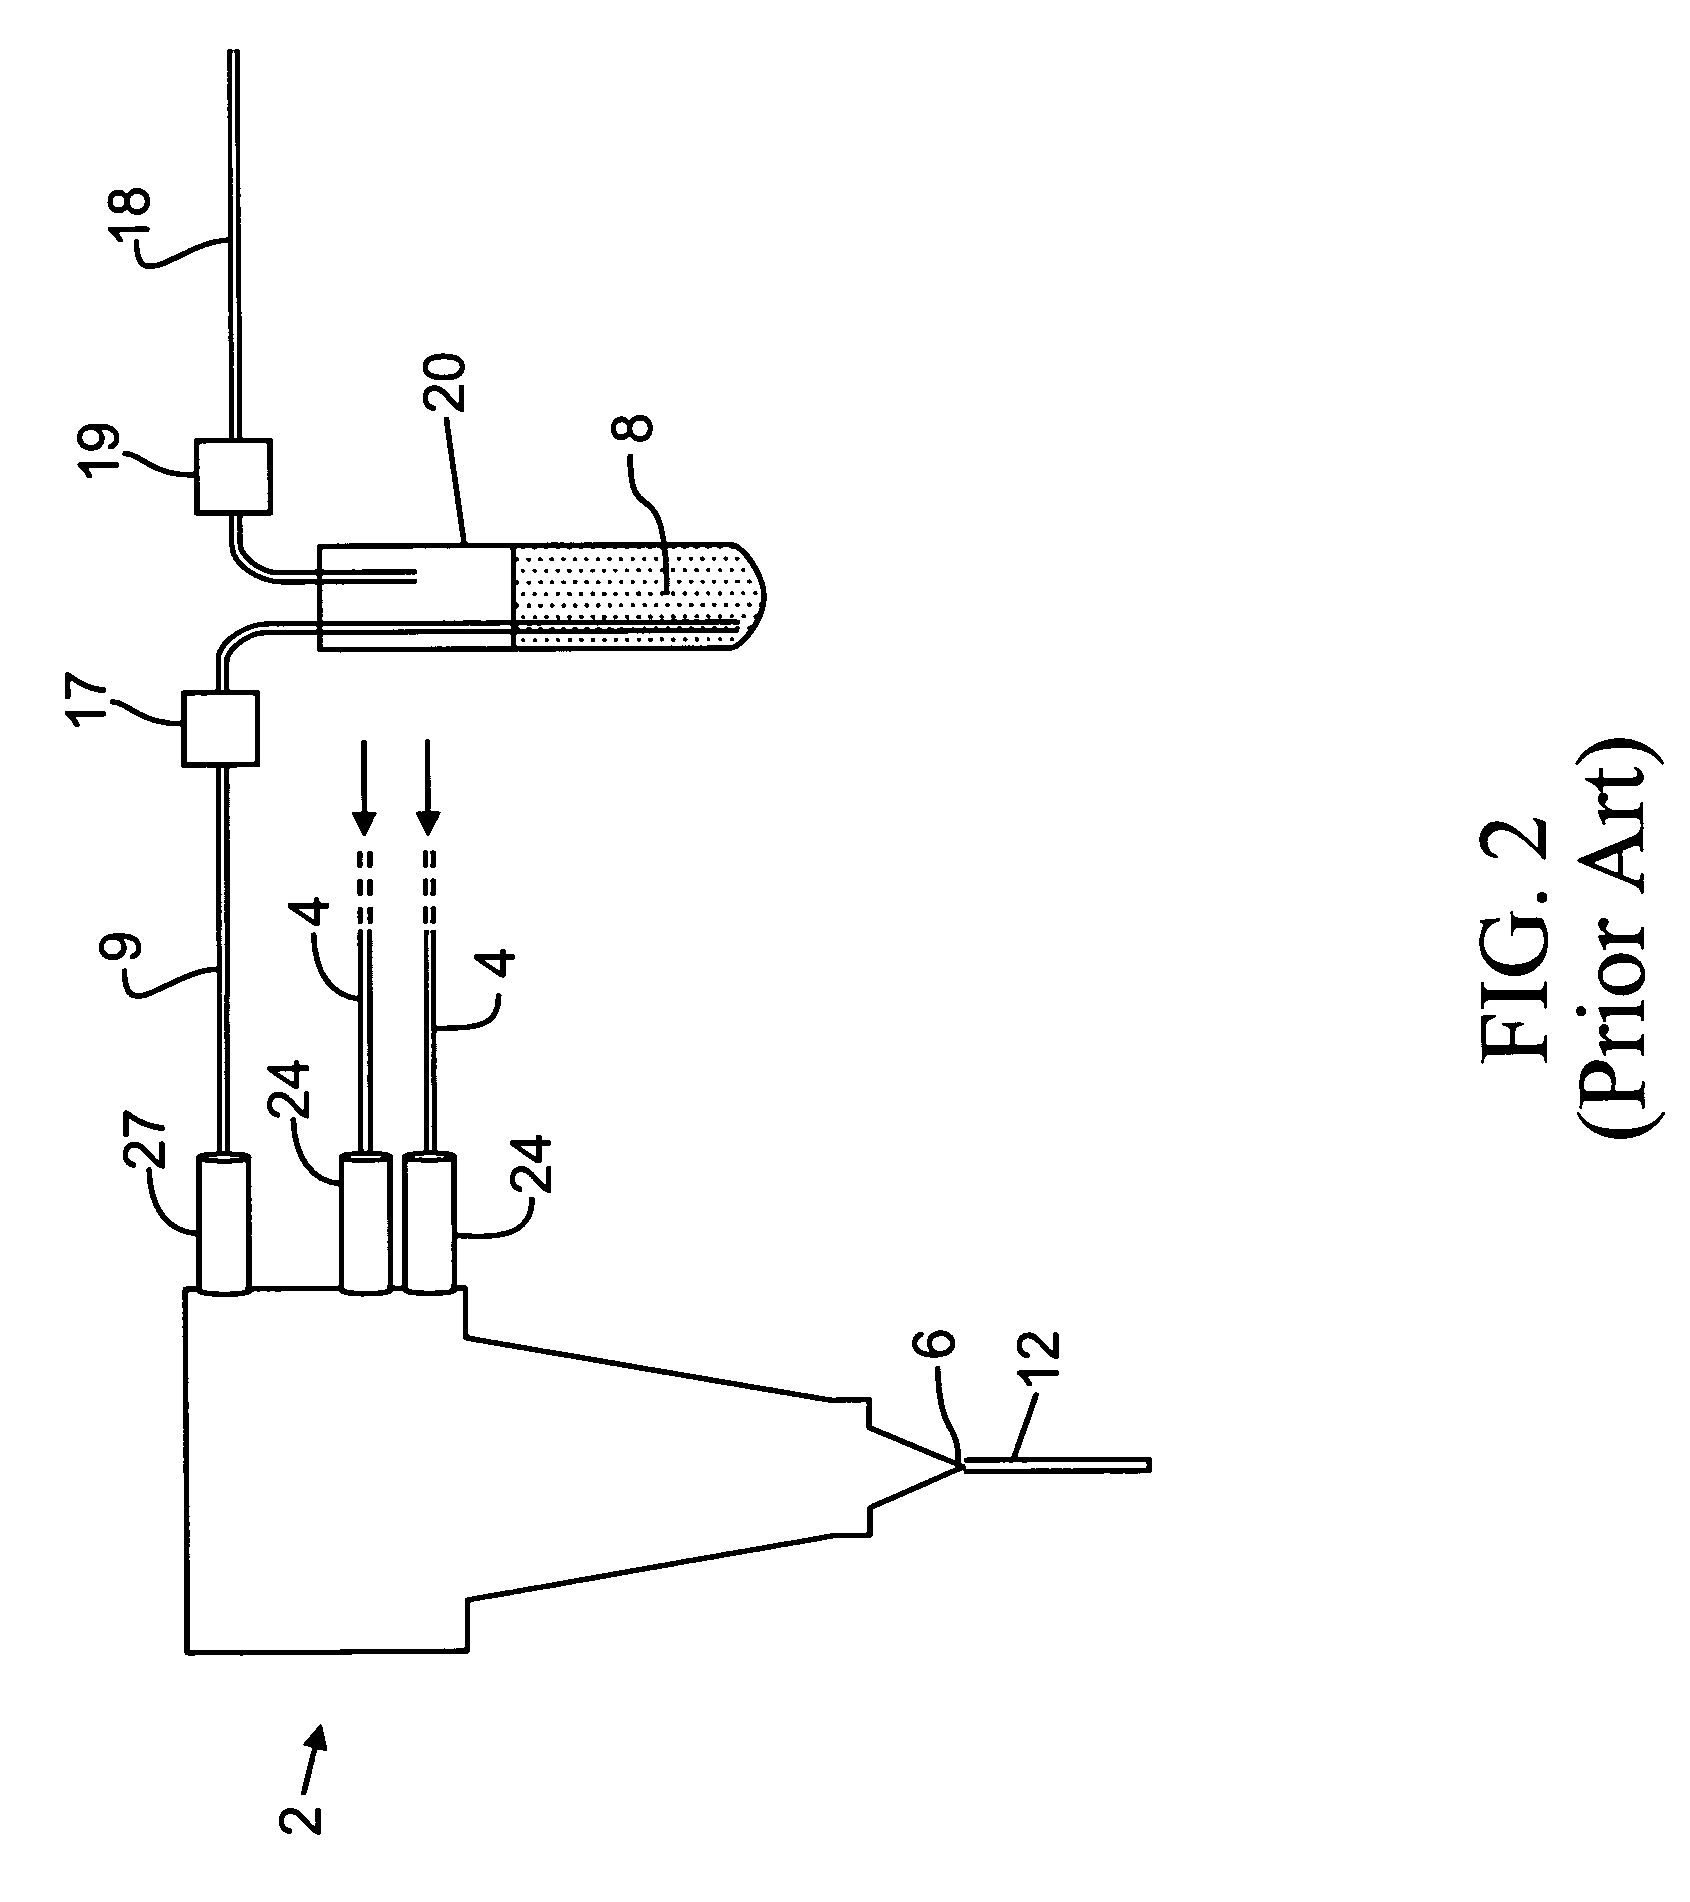 Method and apparatus for syringe-based sample introduction within a flow cytometer